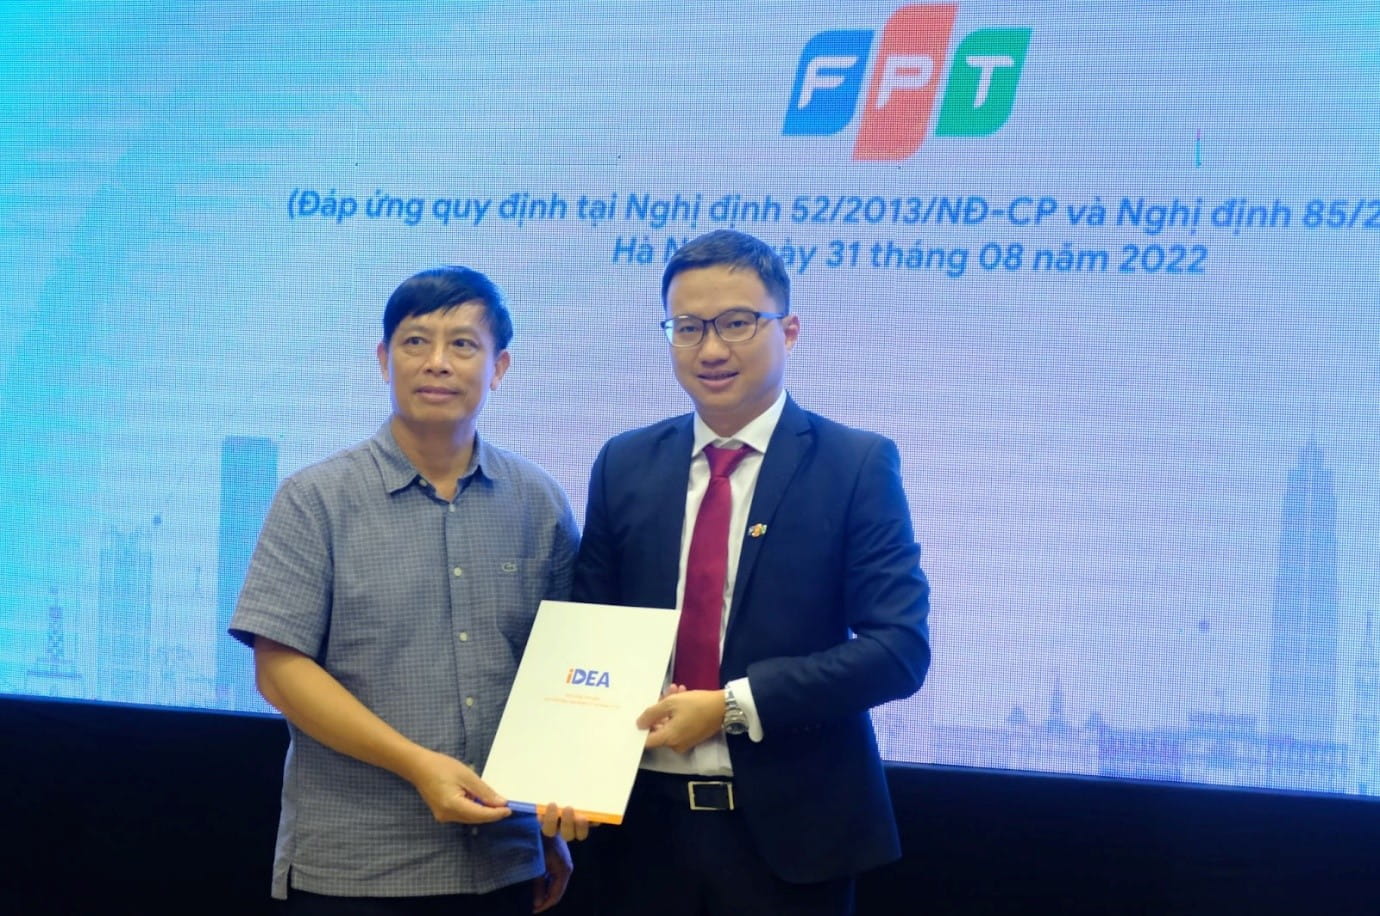 Representative of FPT IS received registration certificate from the MoIT